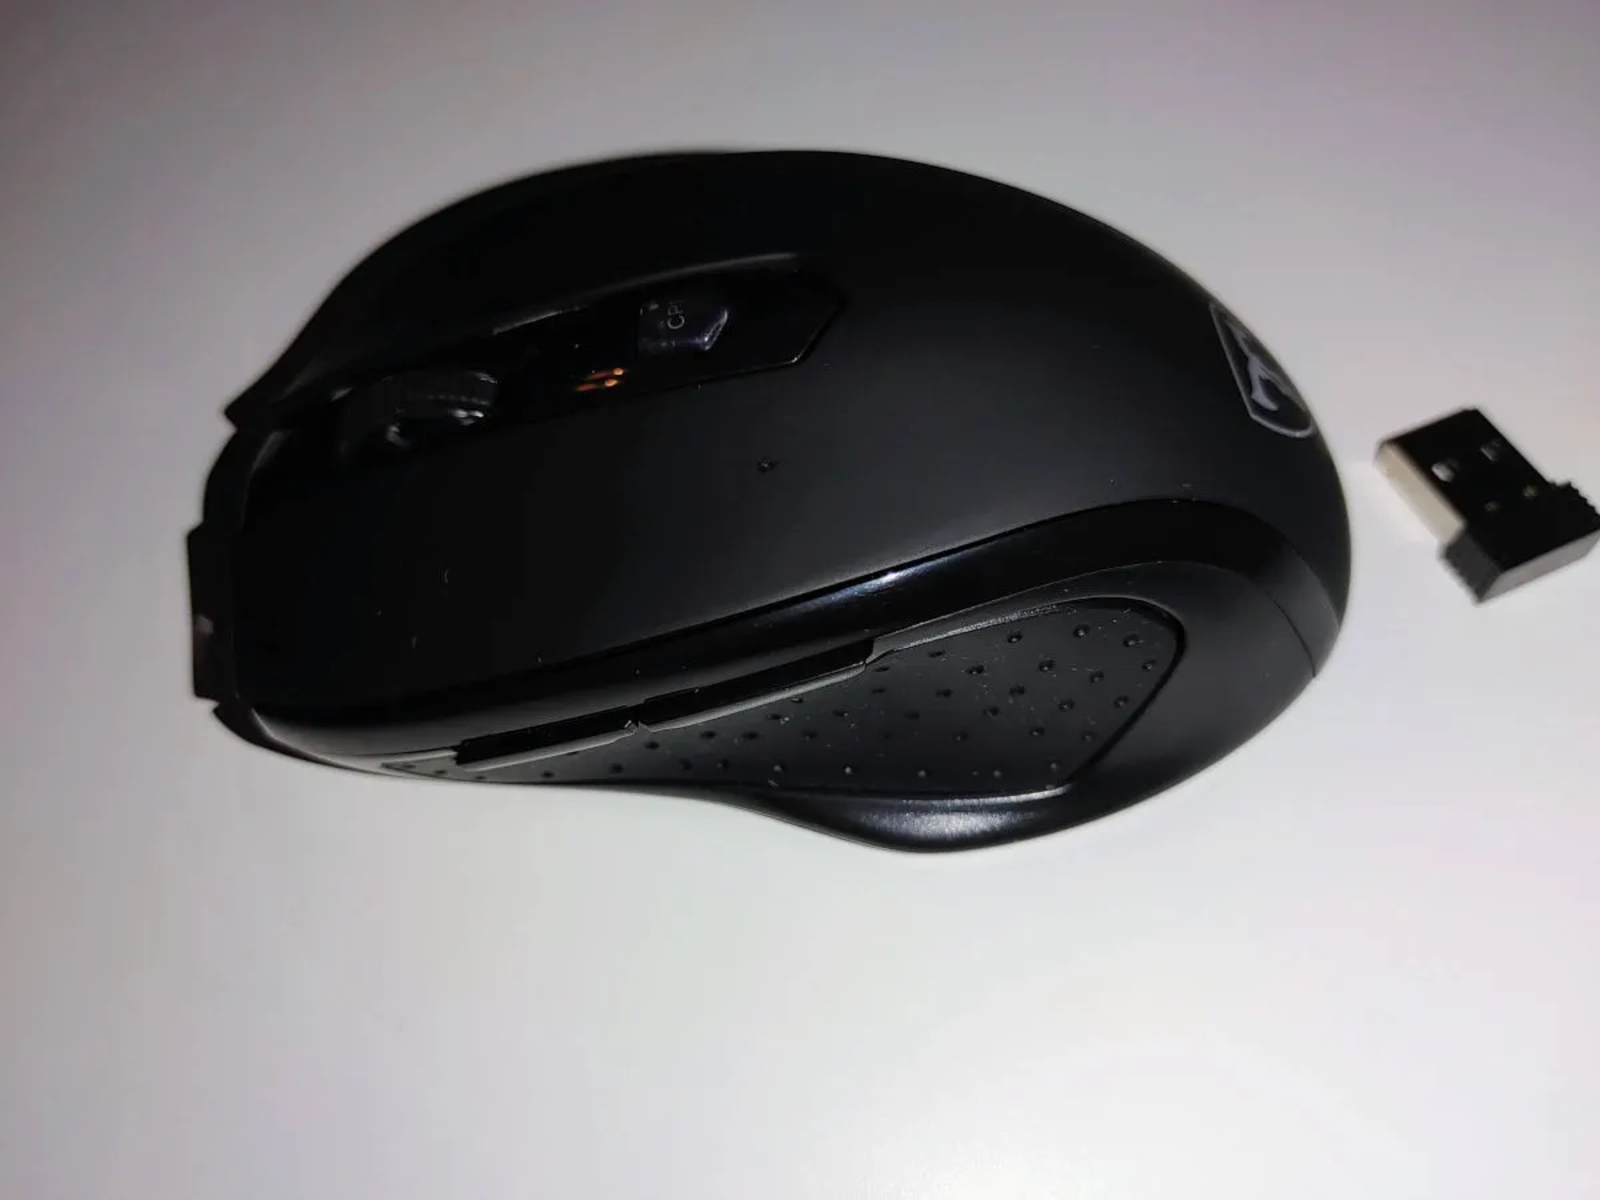 Victsing 2.4G Wireless Gaming Mouse: How To Avoid Changing DPI